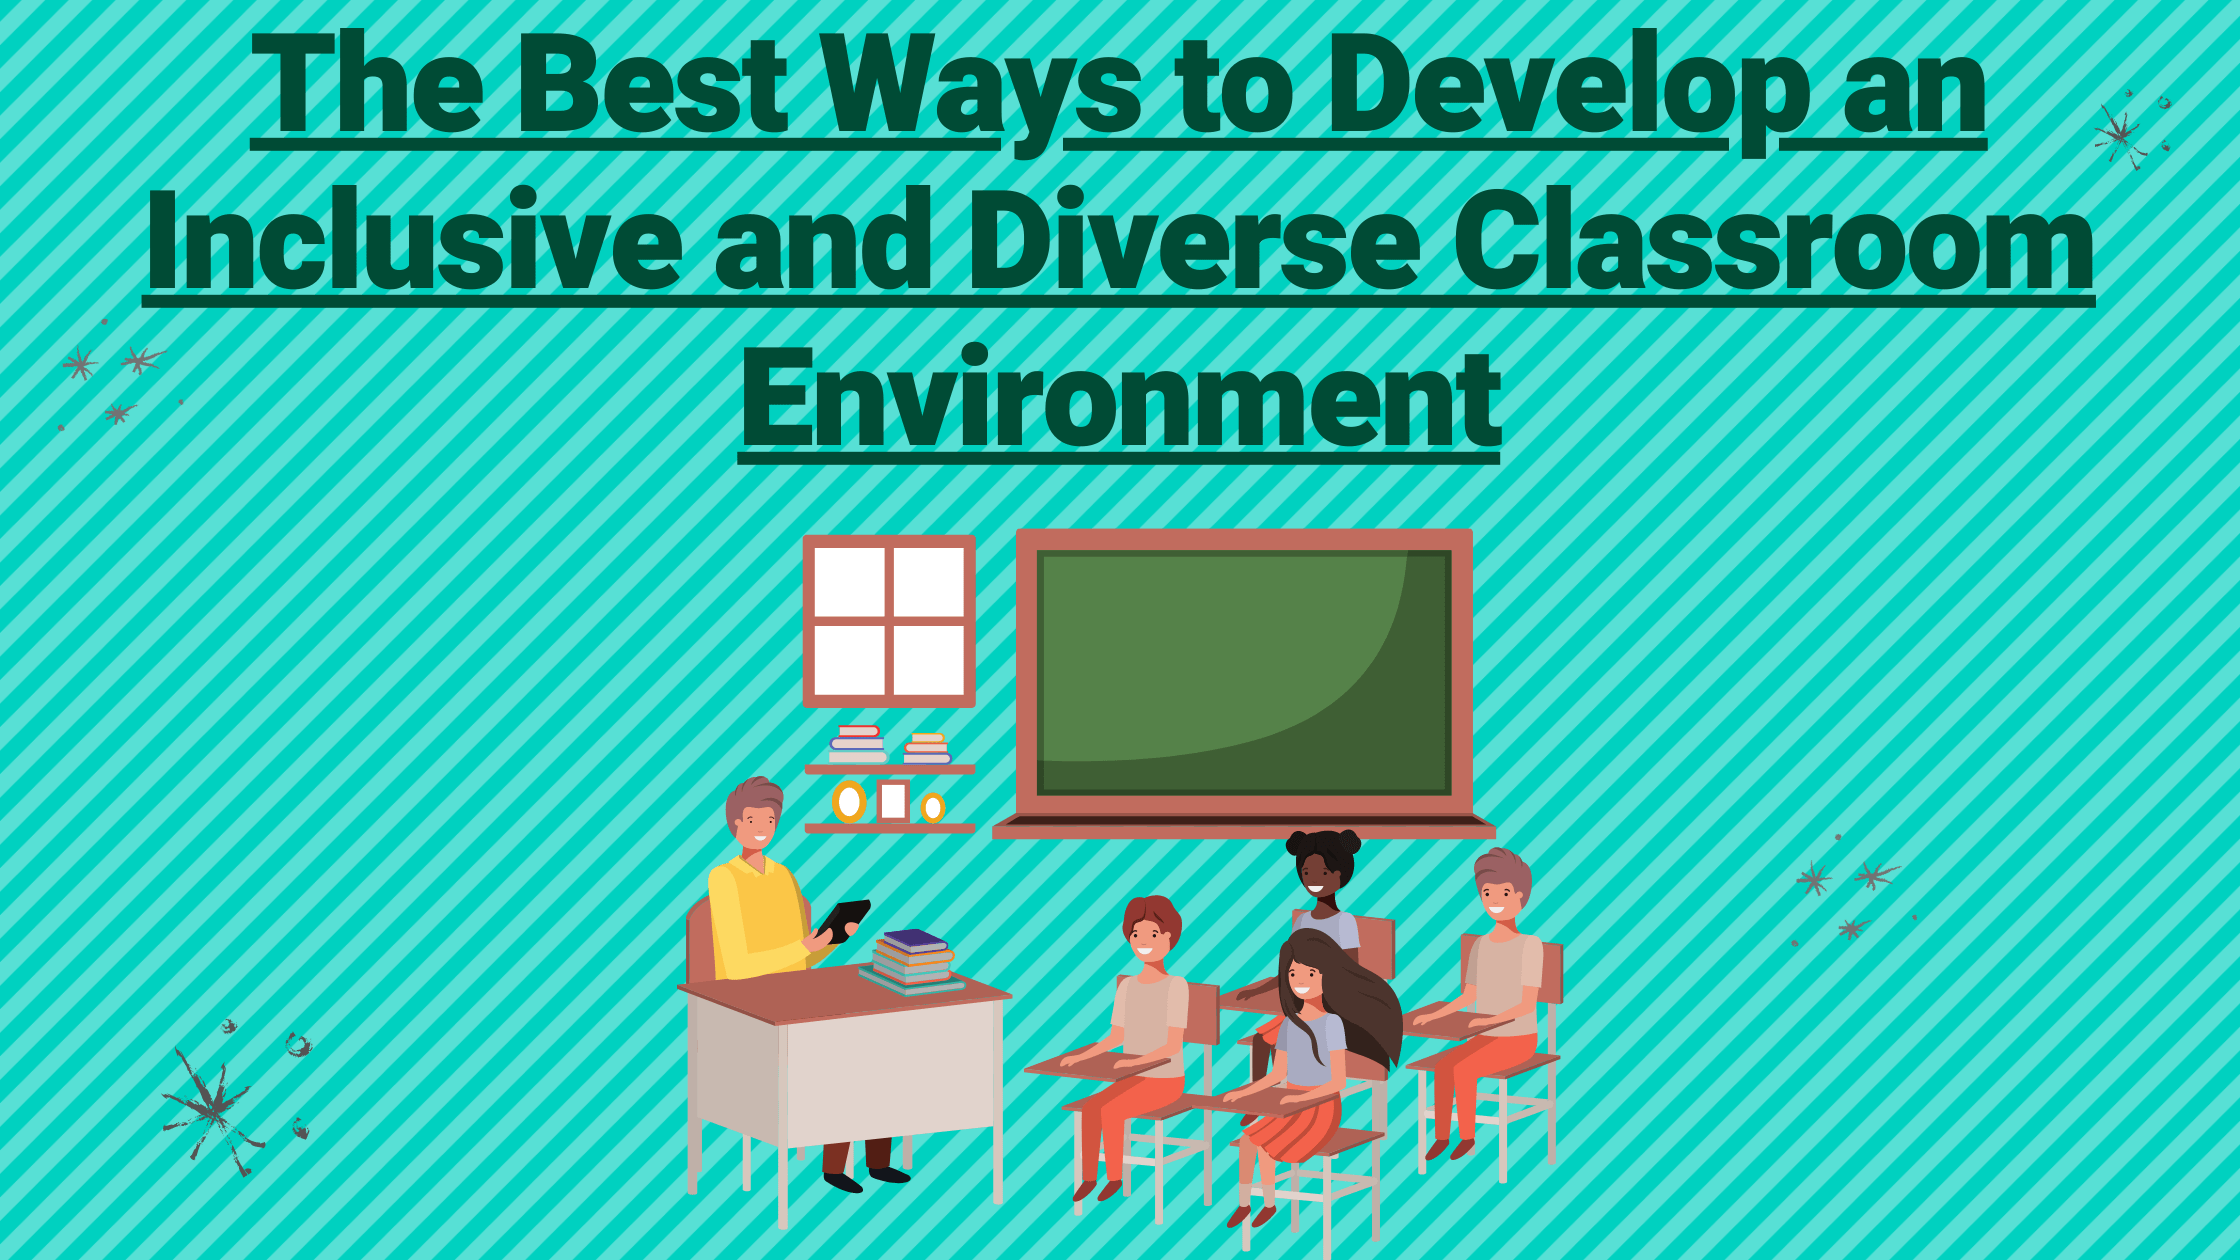 The Best Ways to Develop an Inclusive & Diverse Classroom Environment